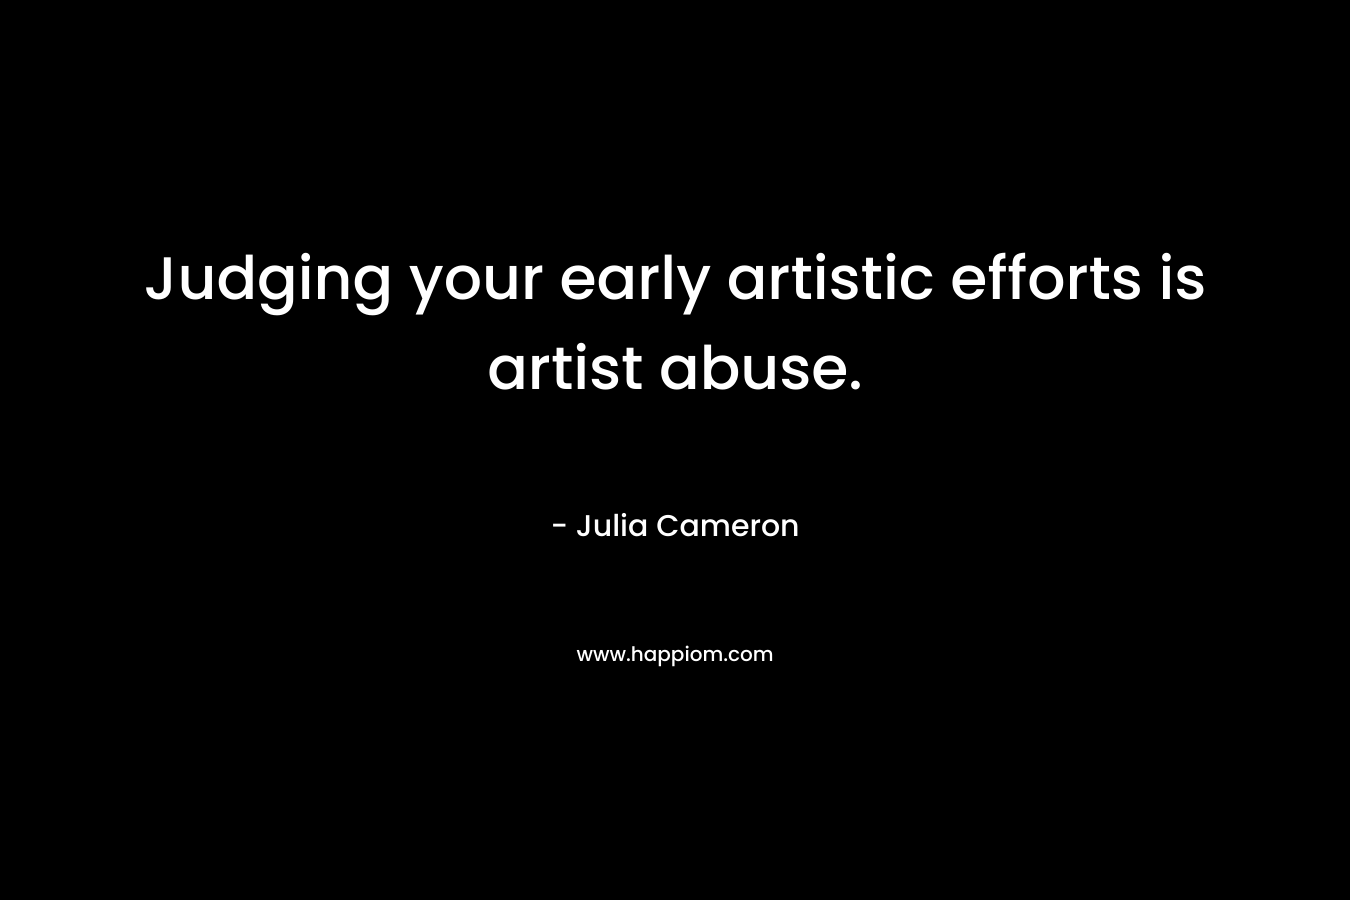 Judging your early artistic efforts is artist abuse. – Julia Cameron